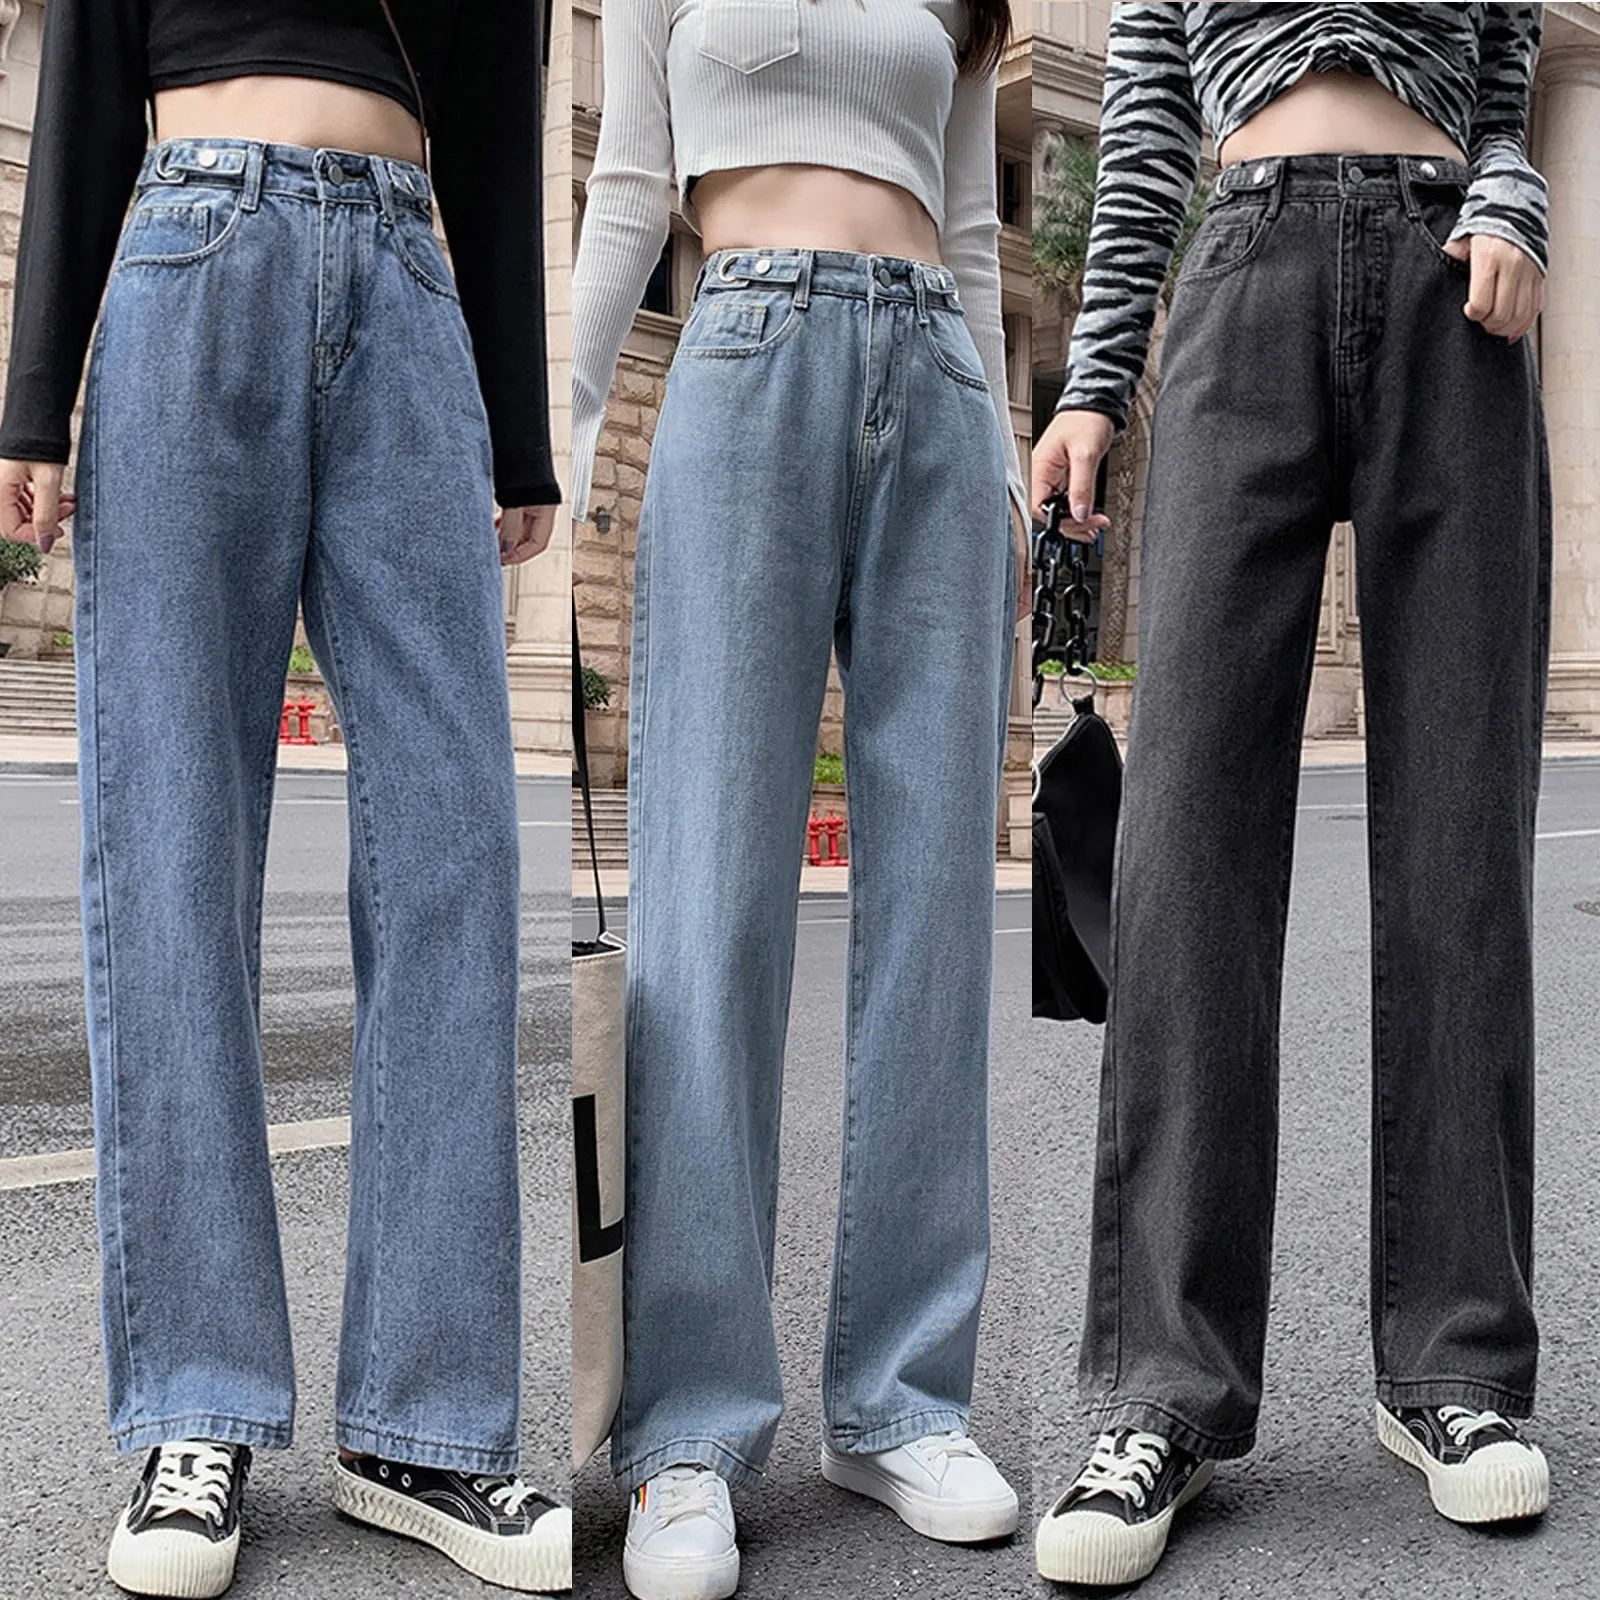 

2021 Women's Casual Pants Hight Waist Distressed Straight Denim Jeans Vintage Trouser Button Fly High Rise Straight Leg Jeans